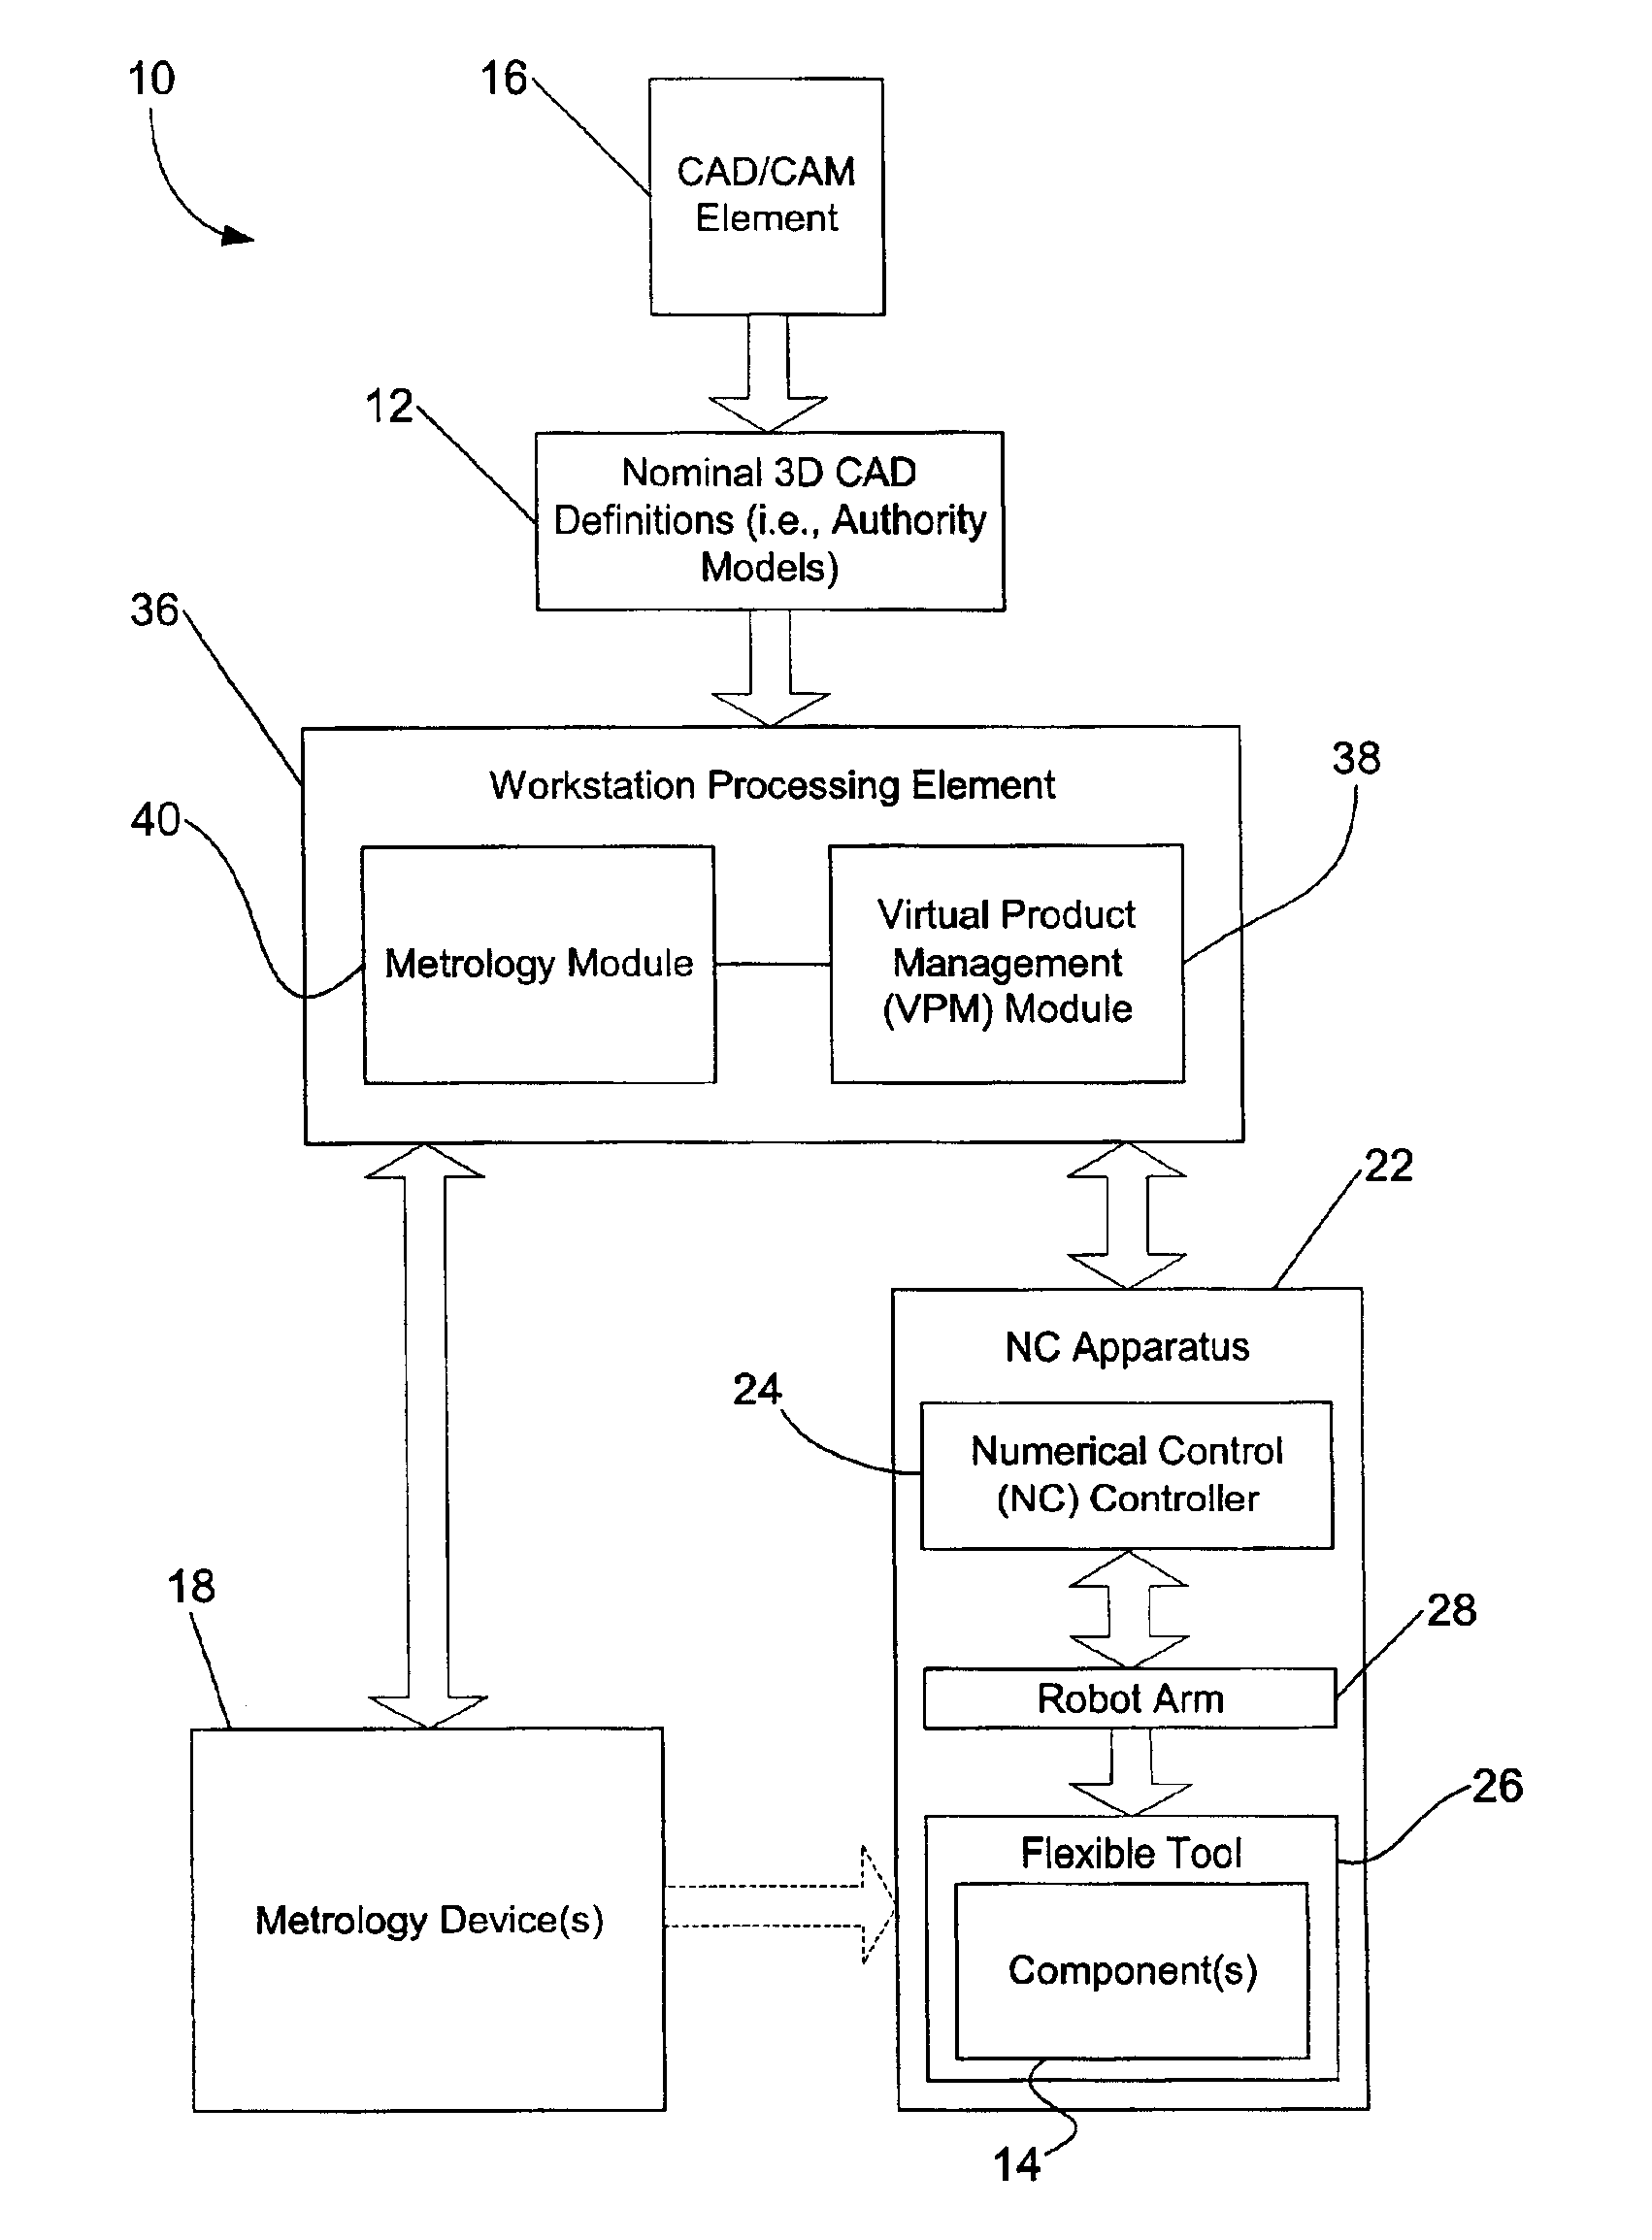 System and method for producing an assembly by directly implementing three-dimensional computer-aided design component definitions